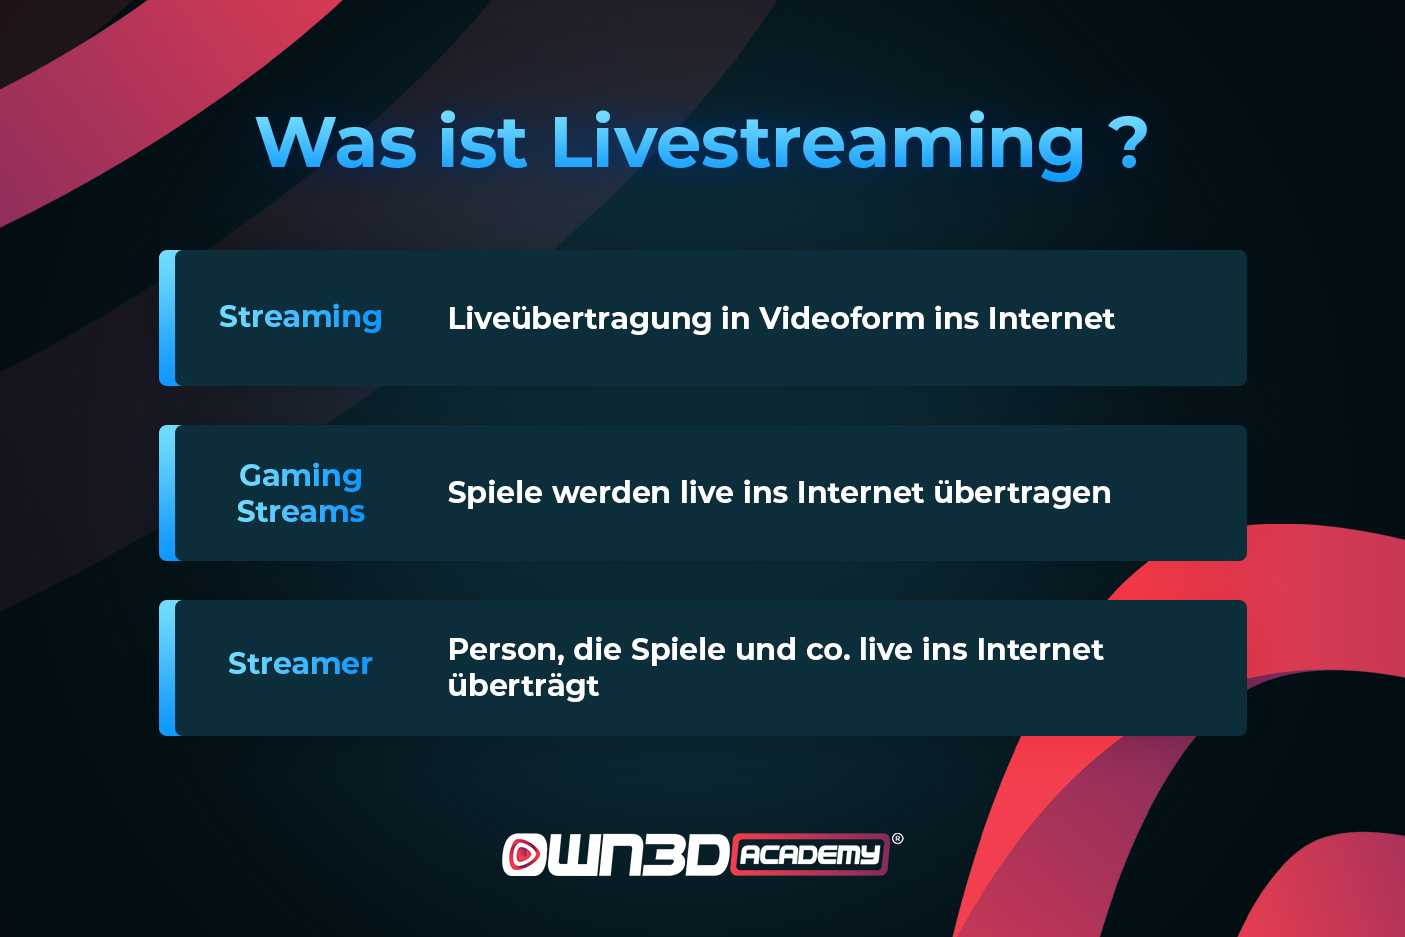 DE_General_What-is-livestreaming_what-is-livestreaming.jpg